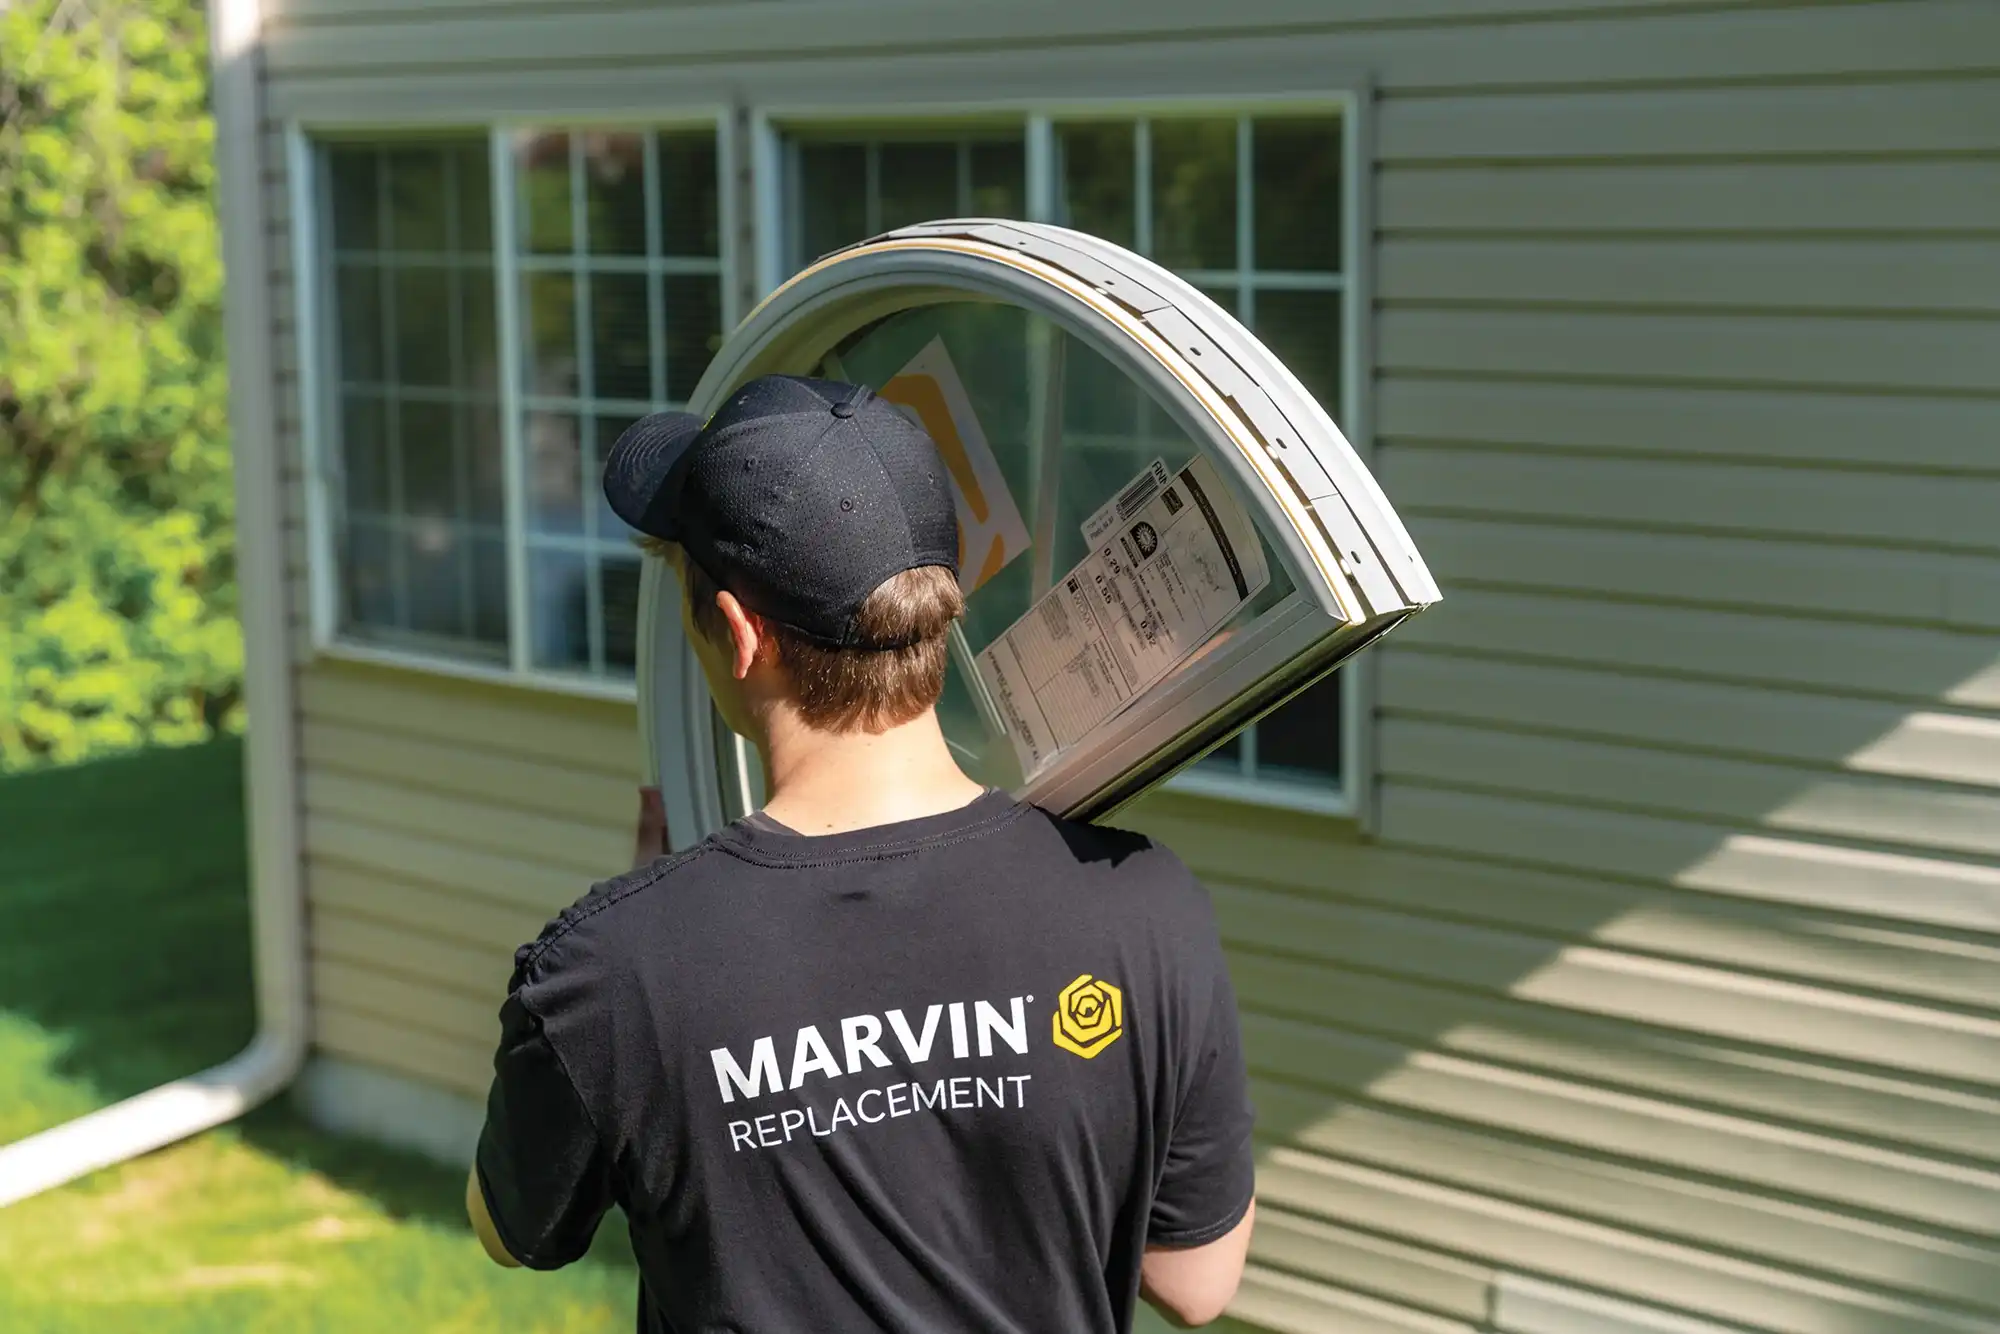 Marvin Replacement window installer in a black hat and black shirt carries a Round Top window.